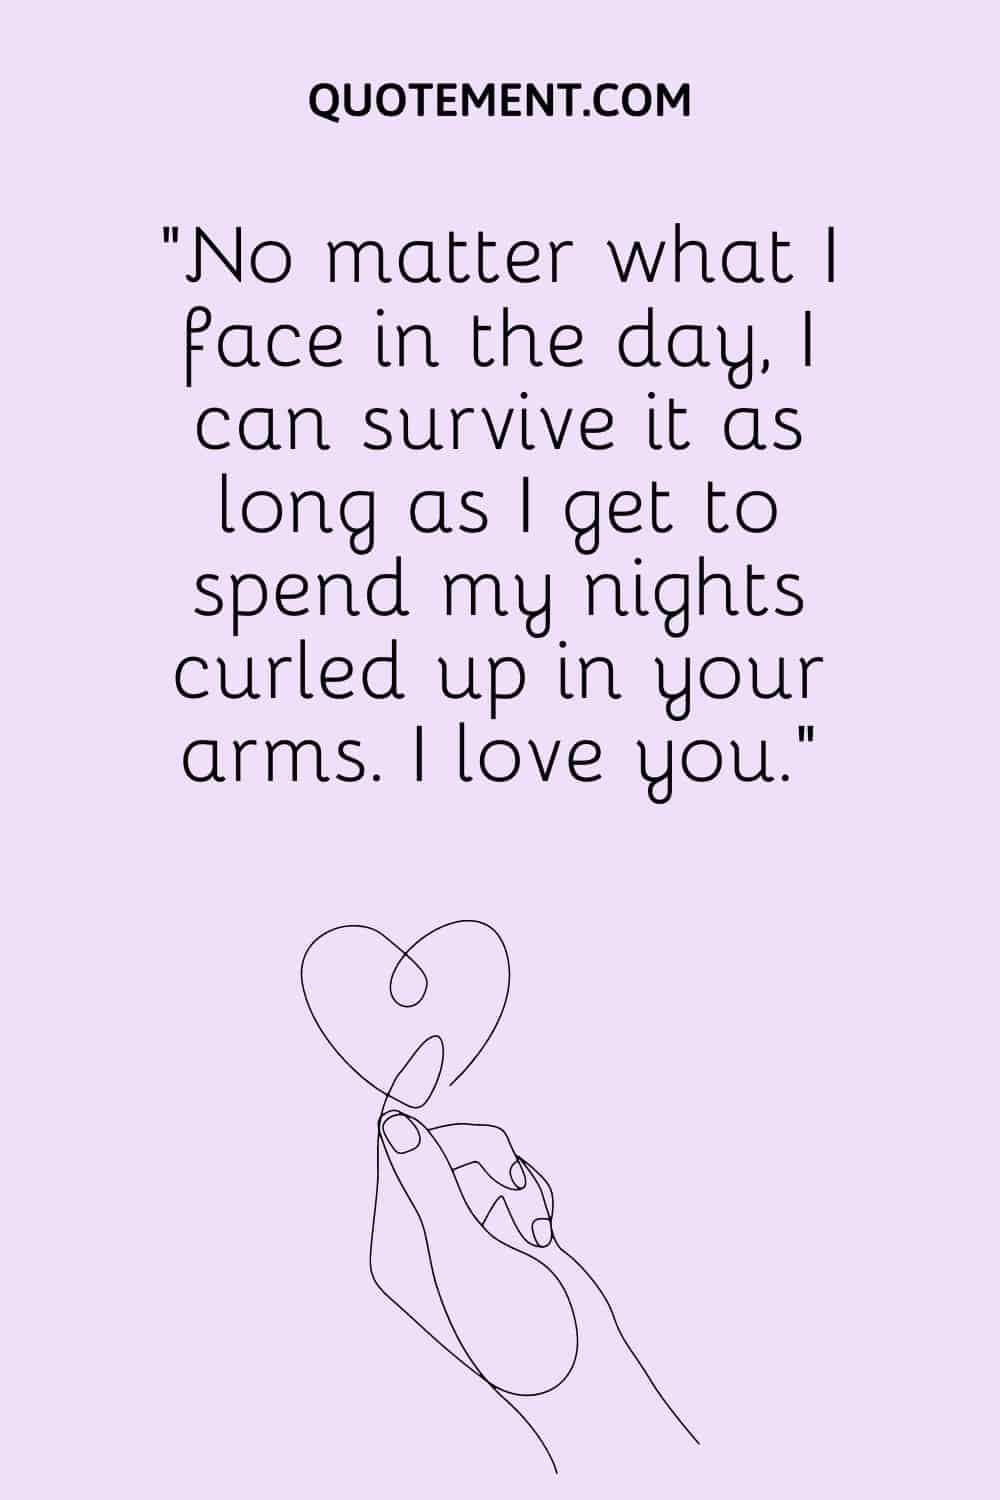 No matter what I face in the day, I can survive it as long as I get to spend my nights curled up in your arms.